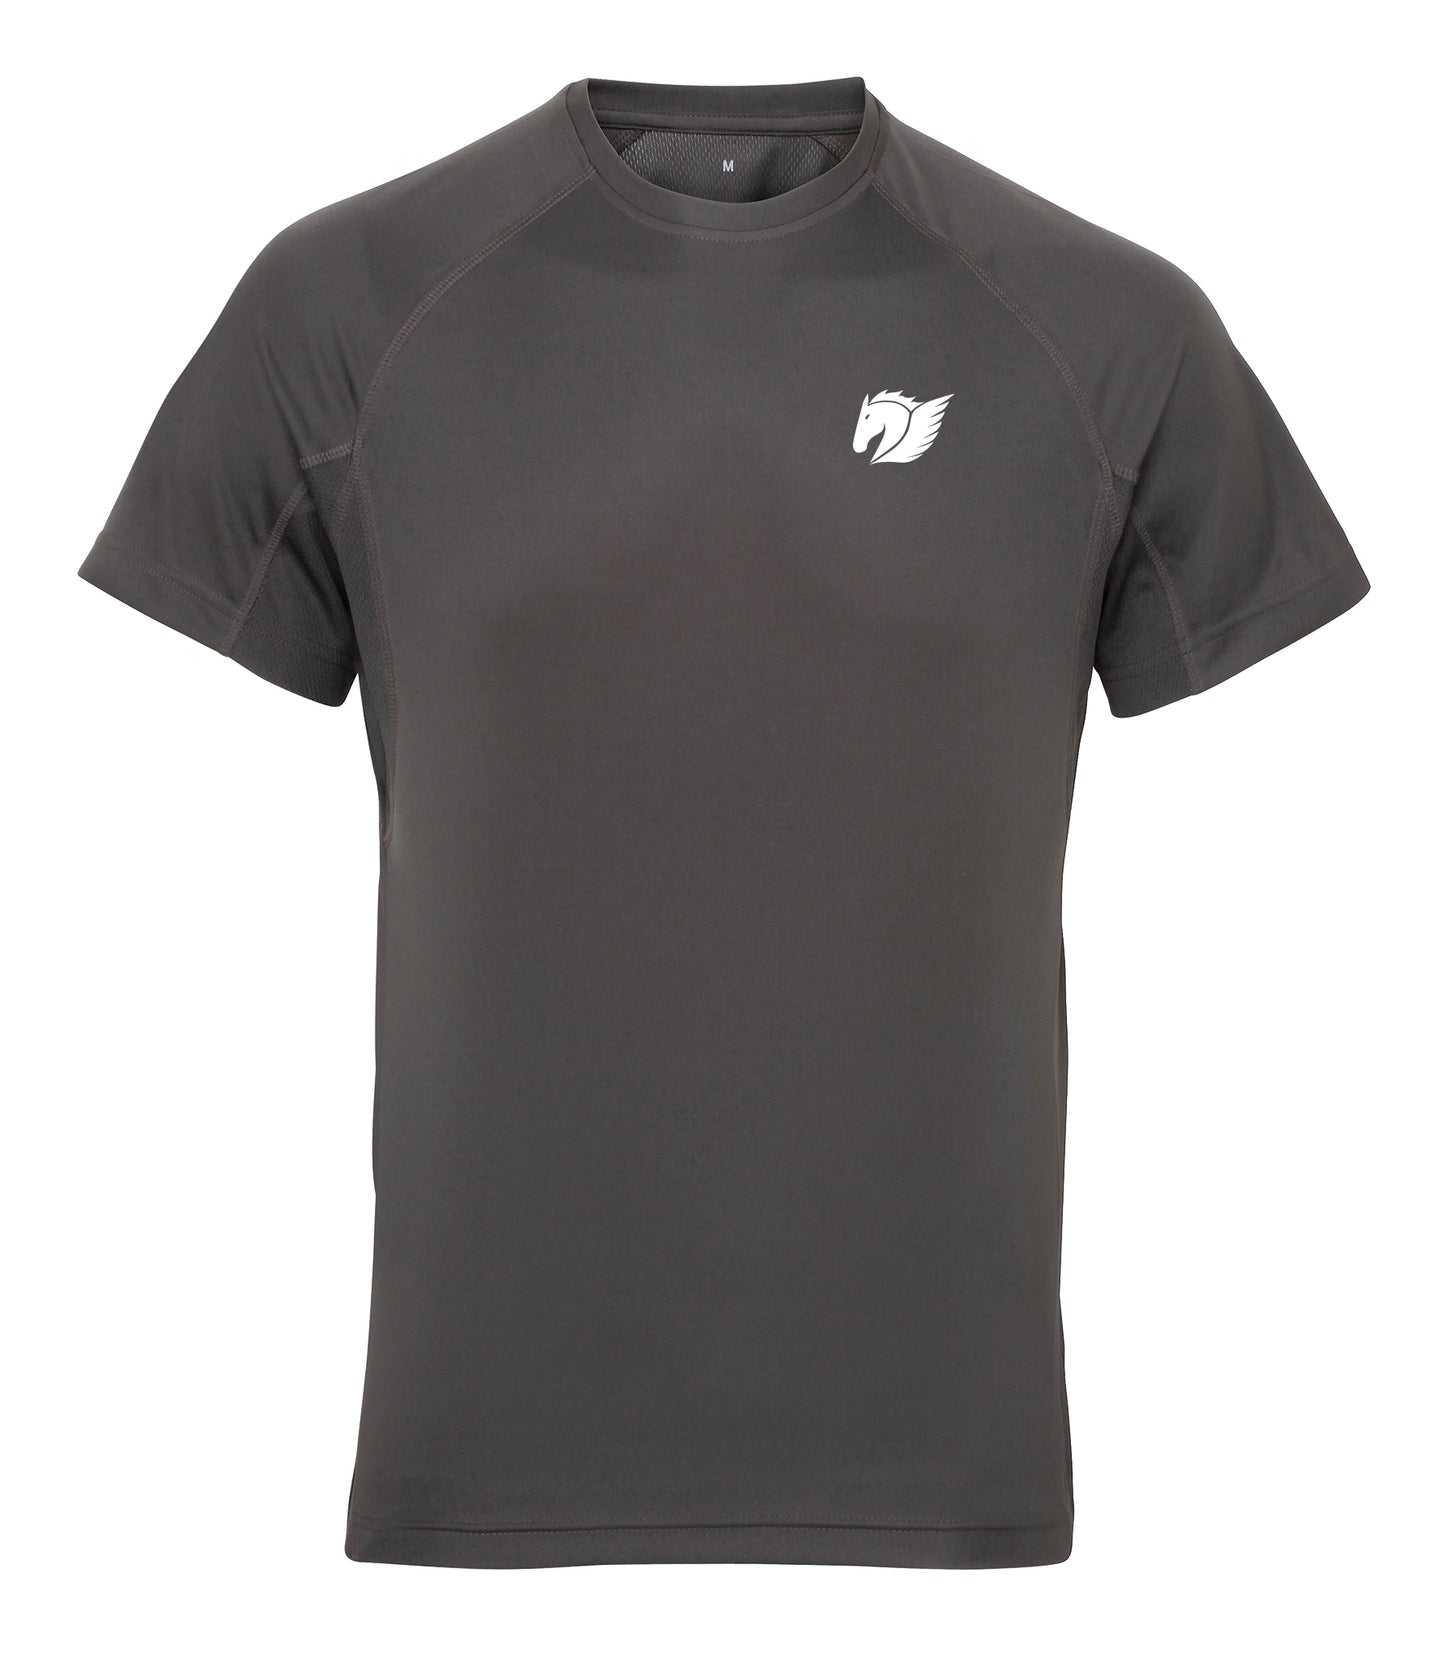 Panelled Tech Tee - Charcoal